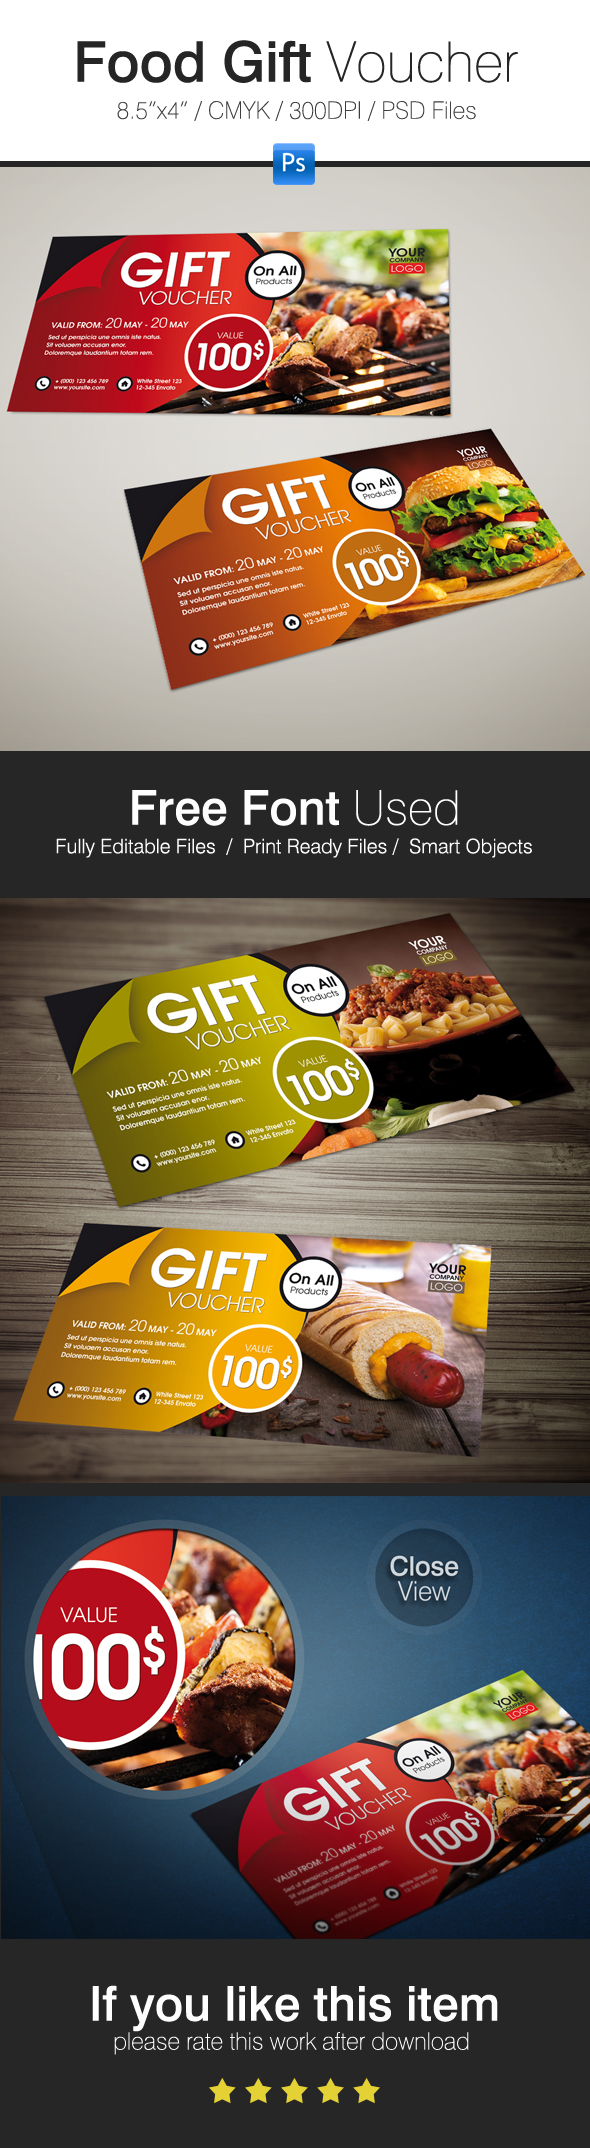 food gift voucher food card template Food Voucher fast food gift cards